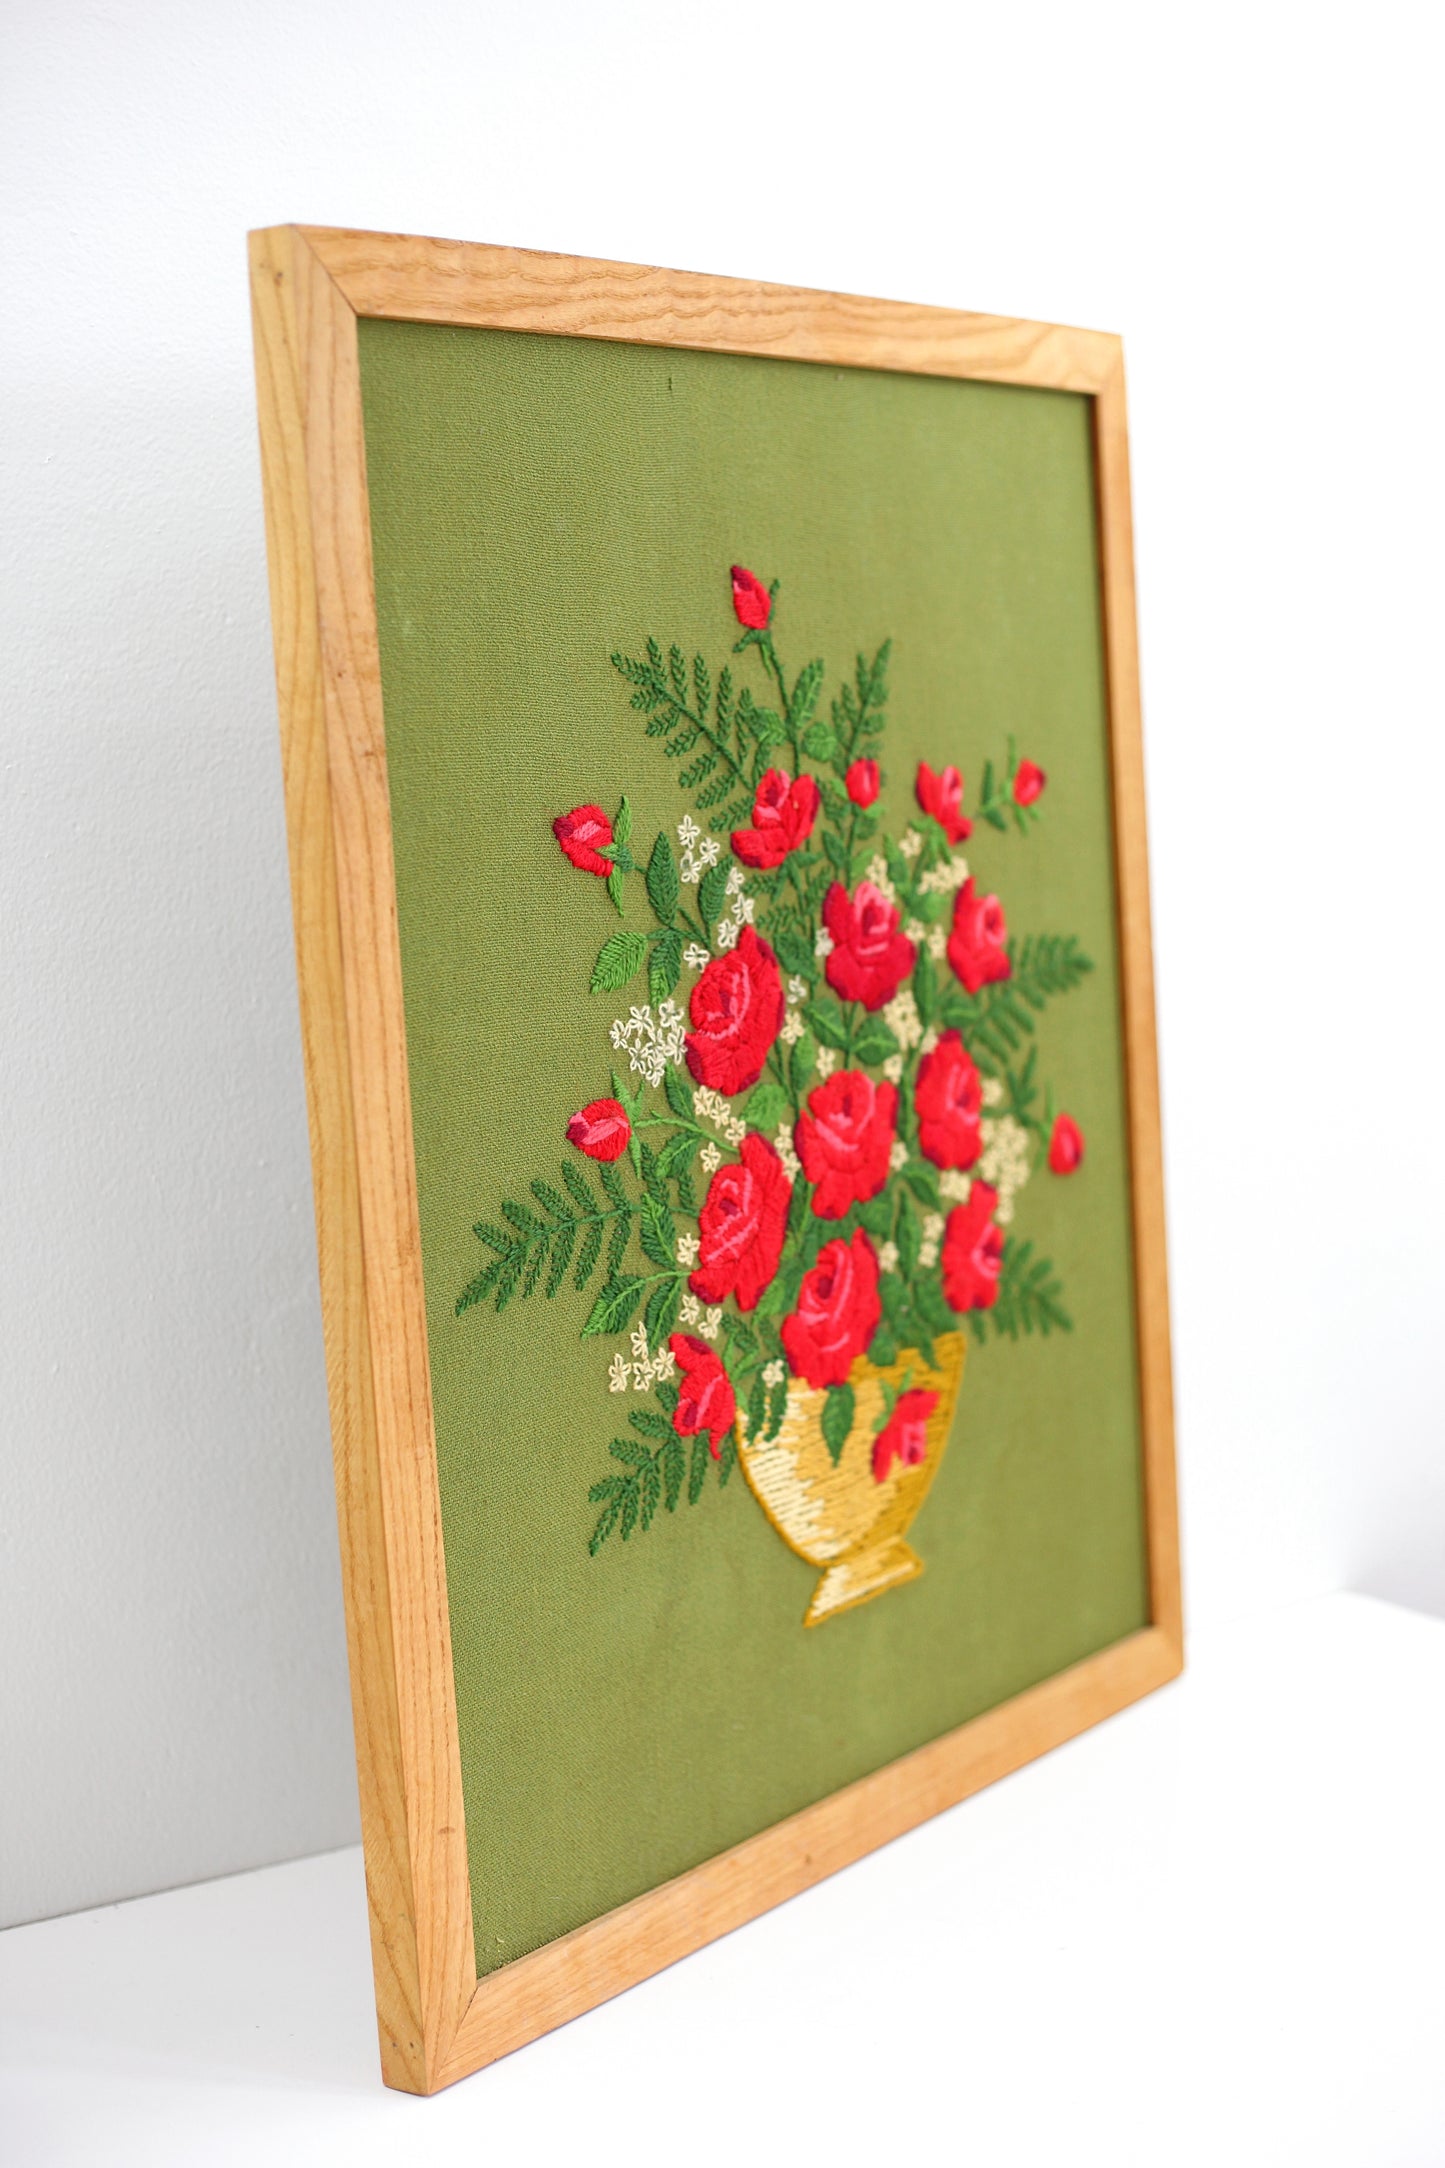 SOLD - Large Vintage Crewel Embroidery - Bouquet of Roses